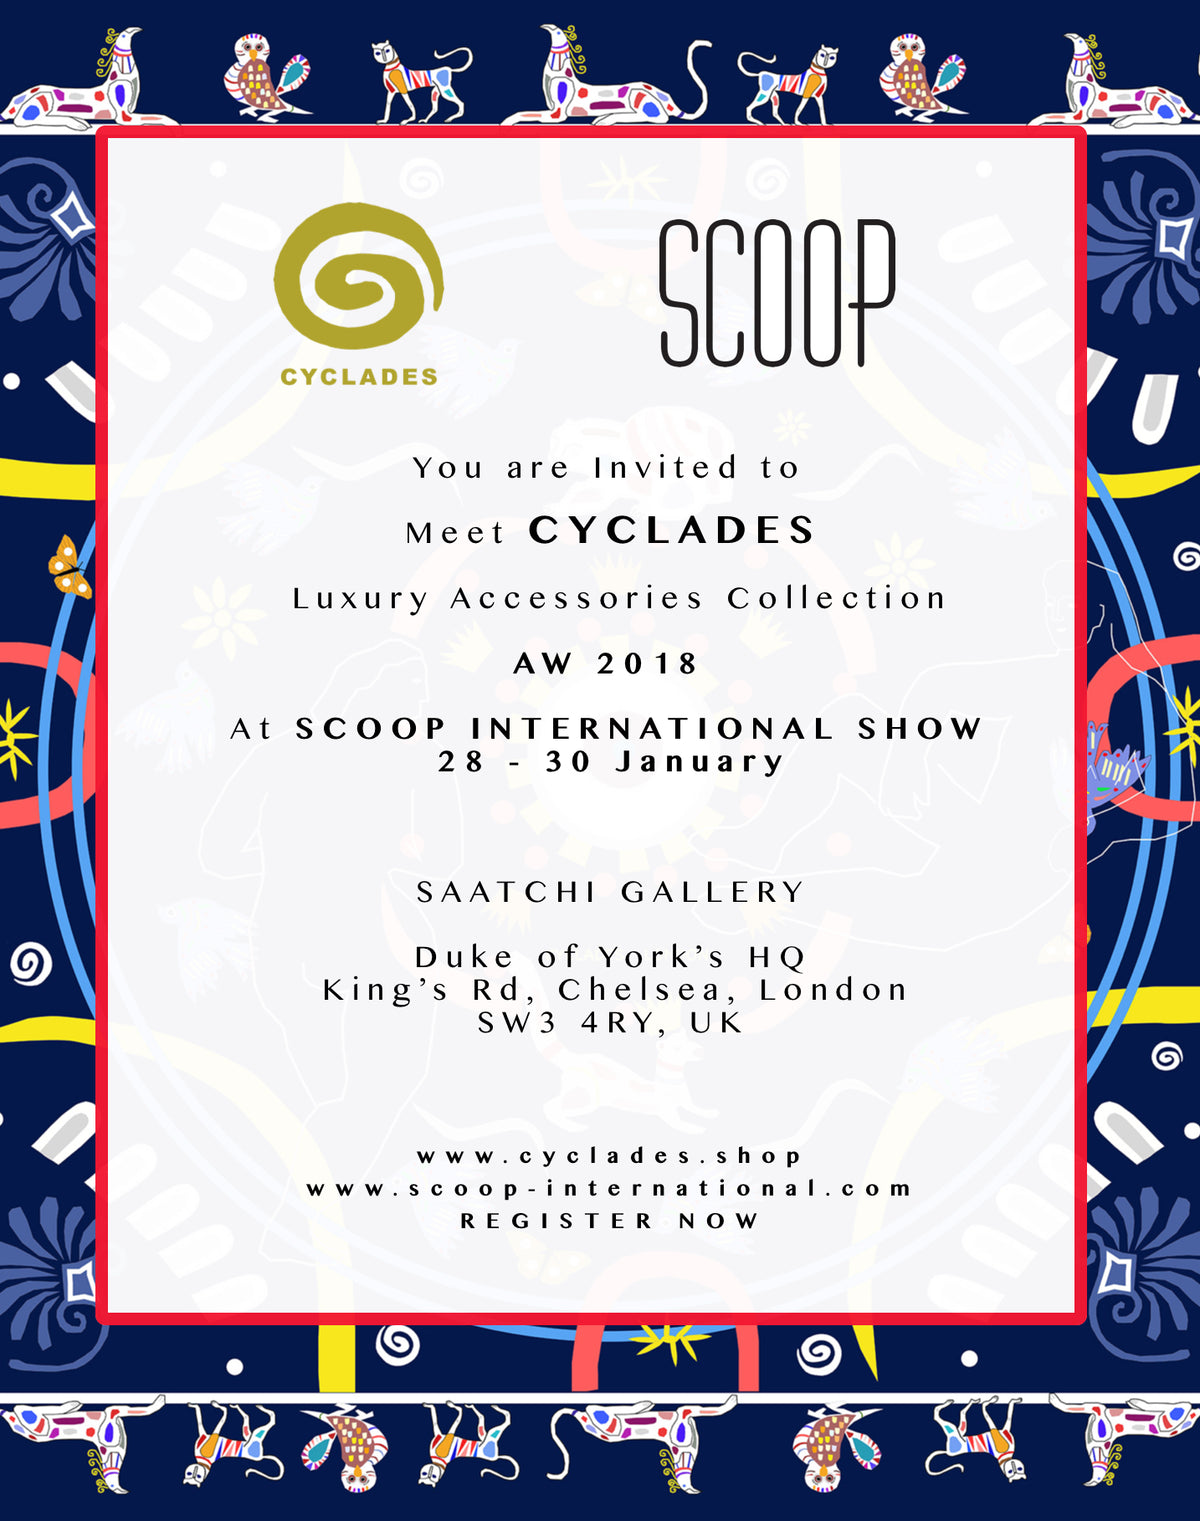 Cyclades at Scoop International Fashion Show